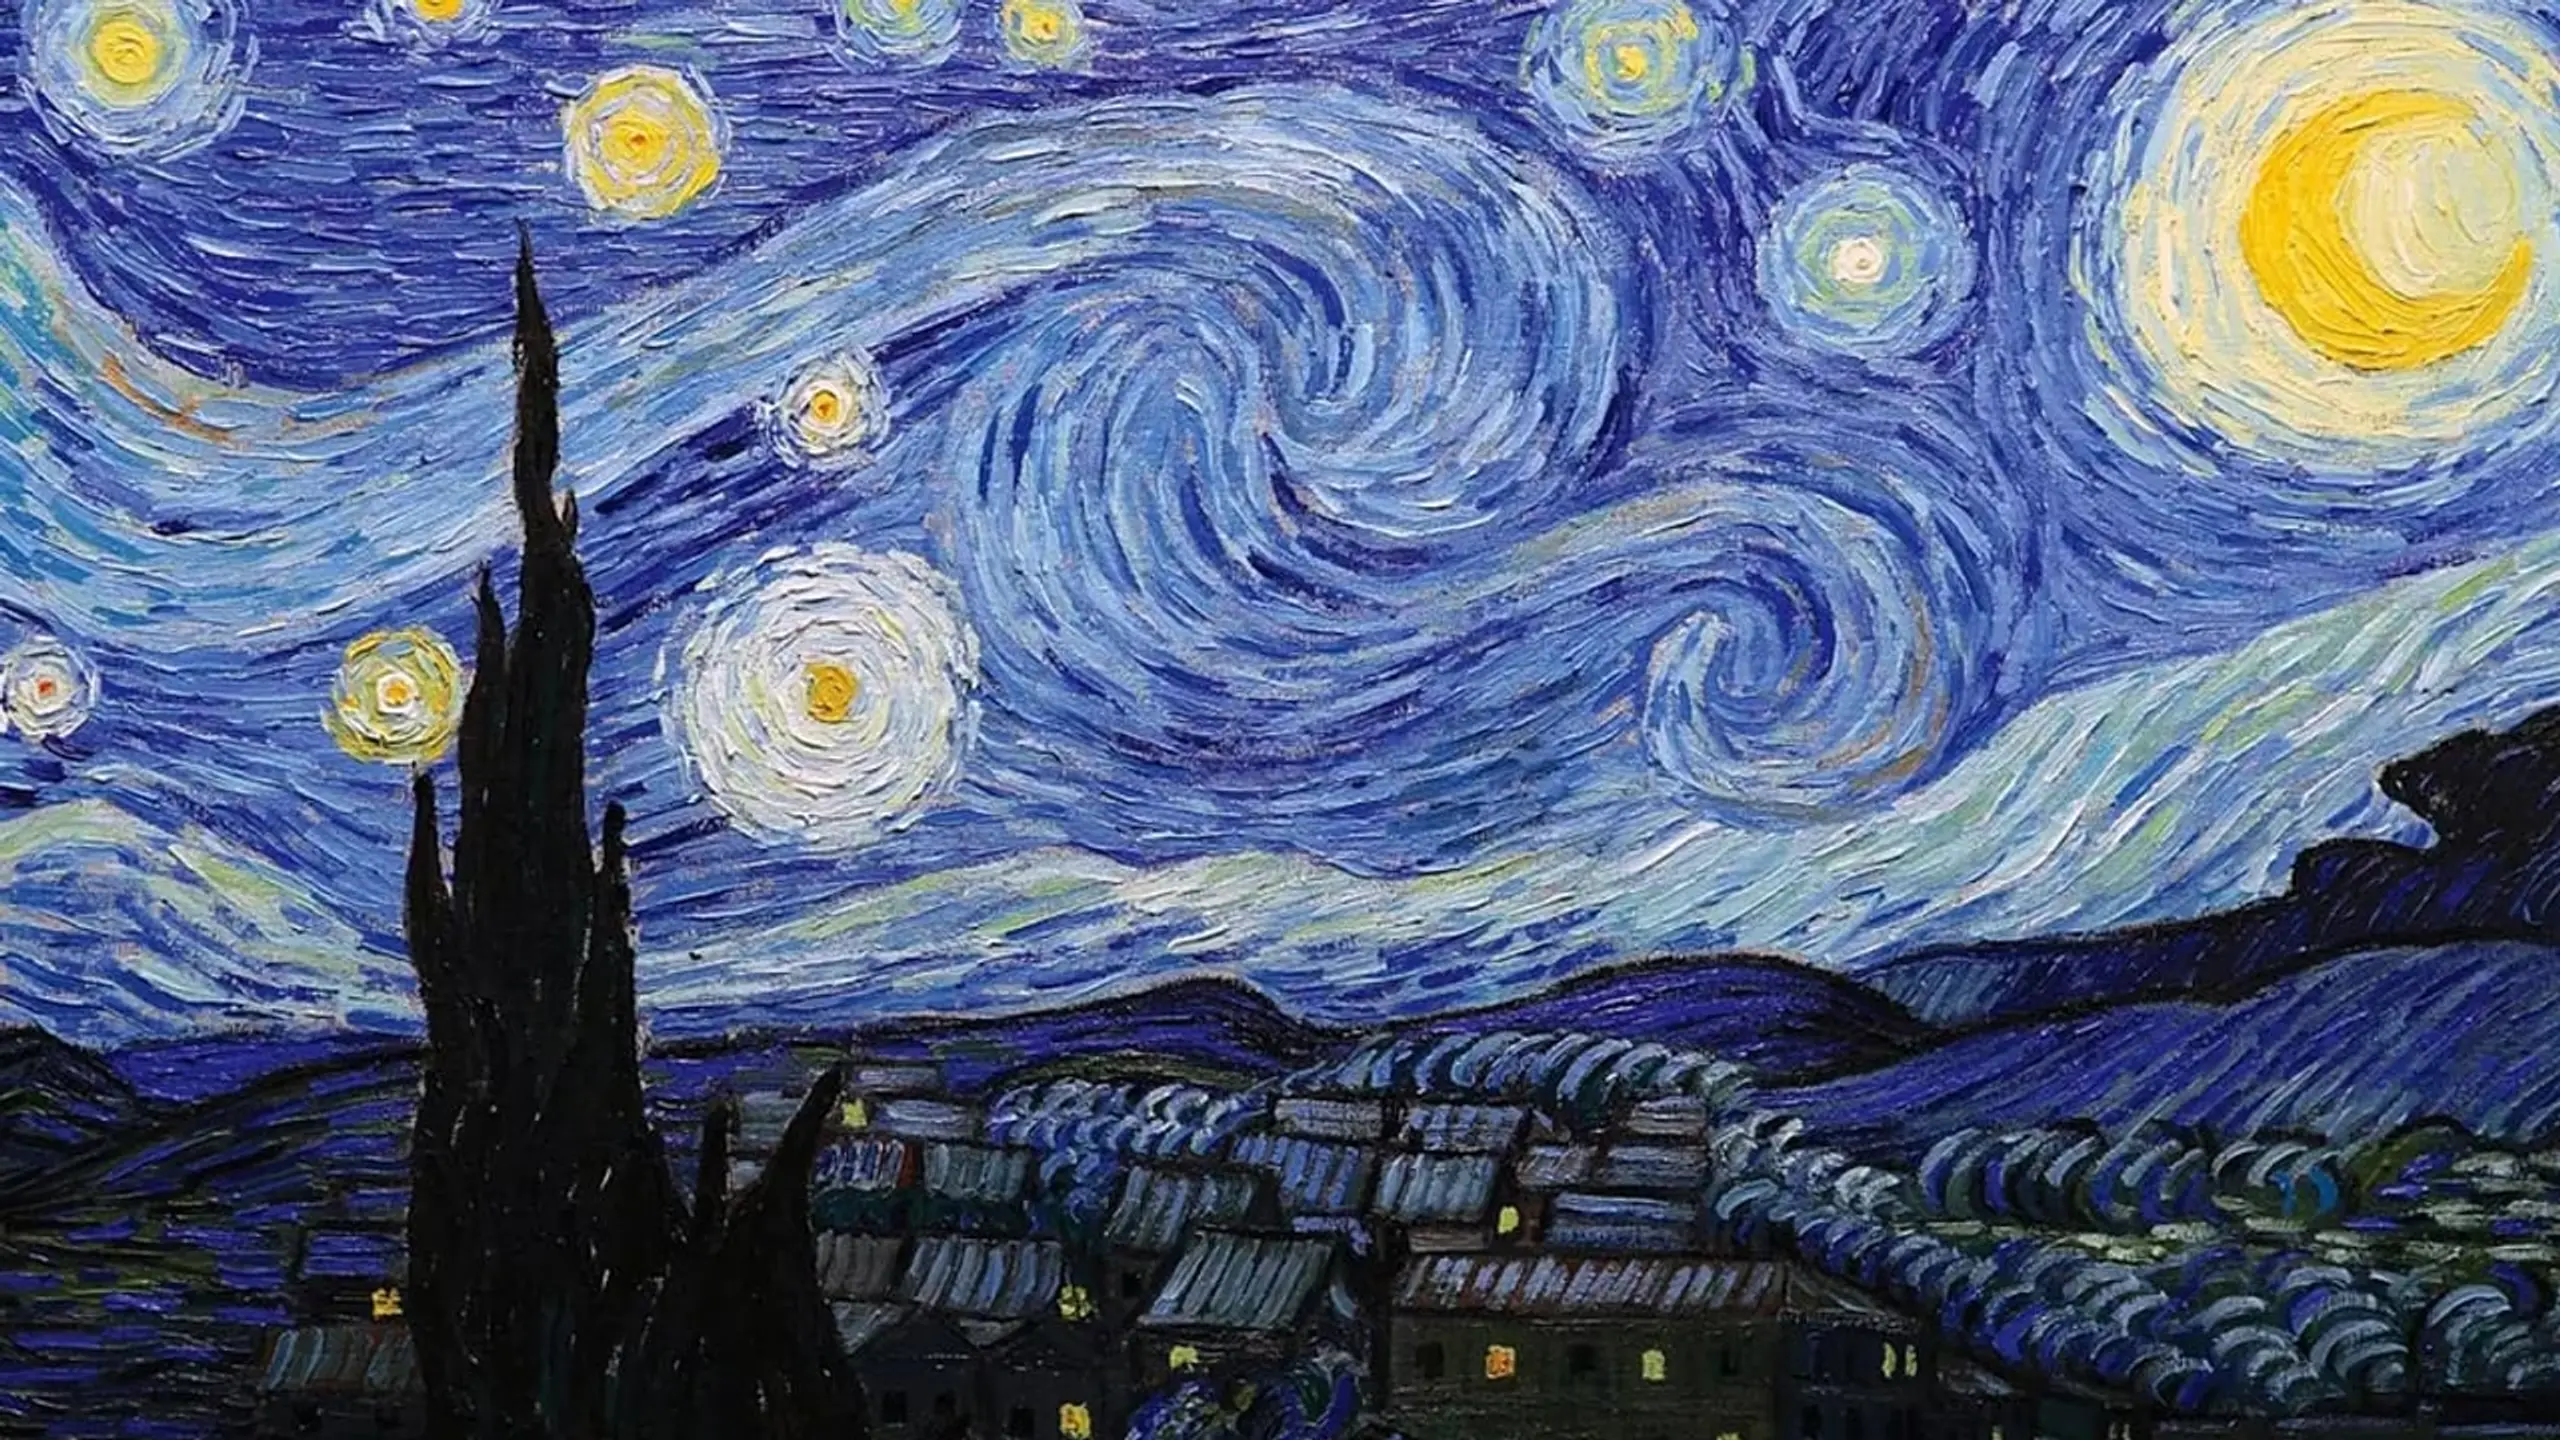 Loving Vincent: The Impossible Dream